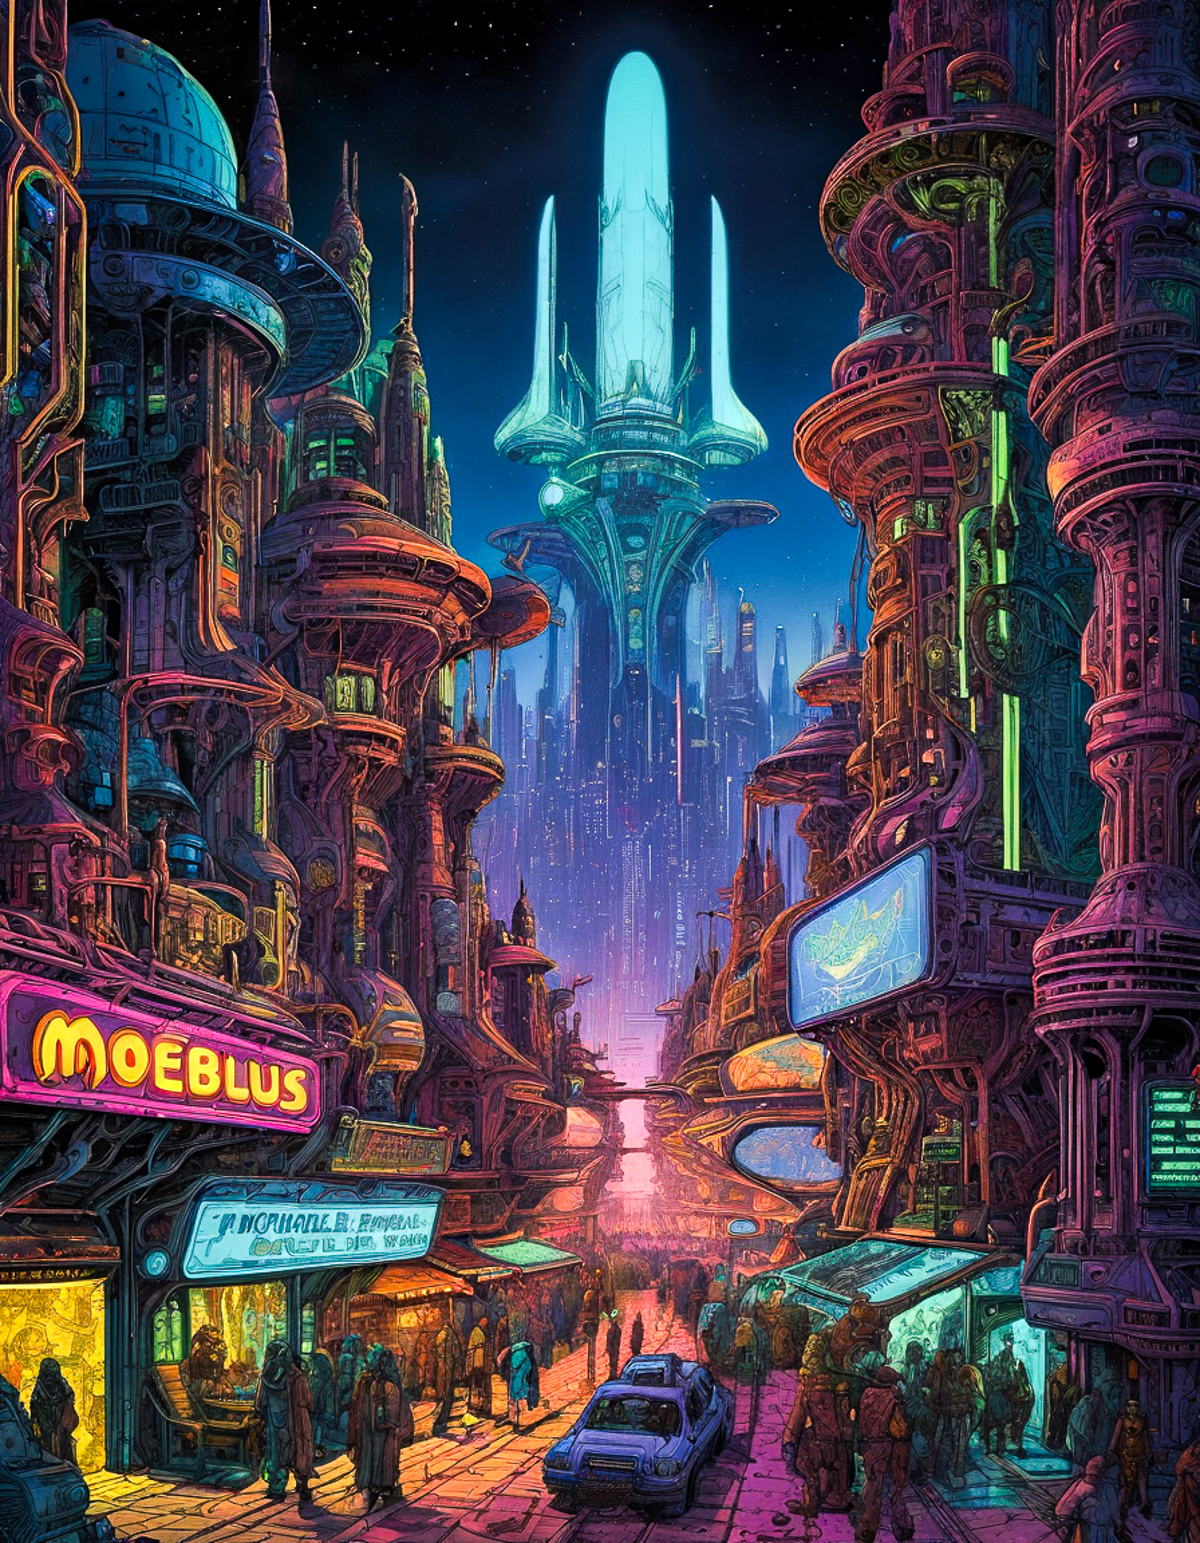 Futuristic cityscape with a neon sign that says "moeblous" and a group of people walking down the street.